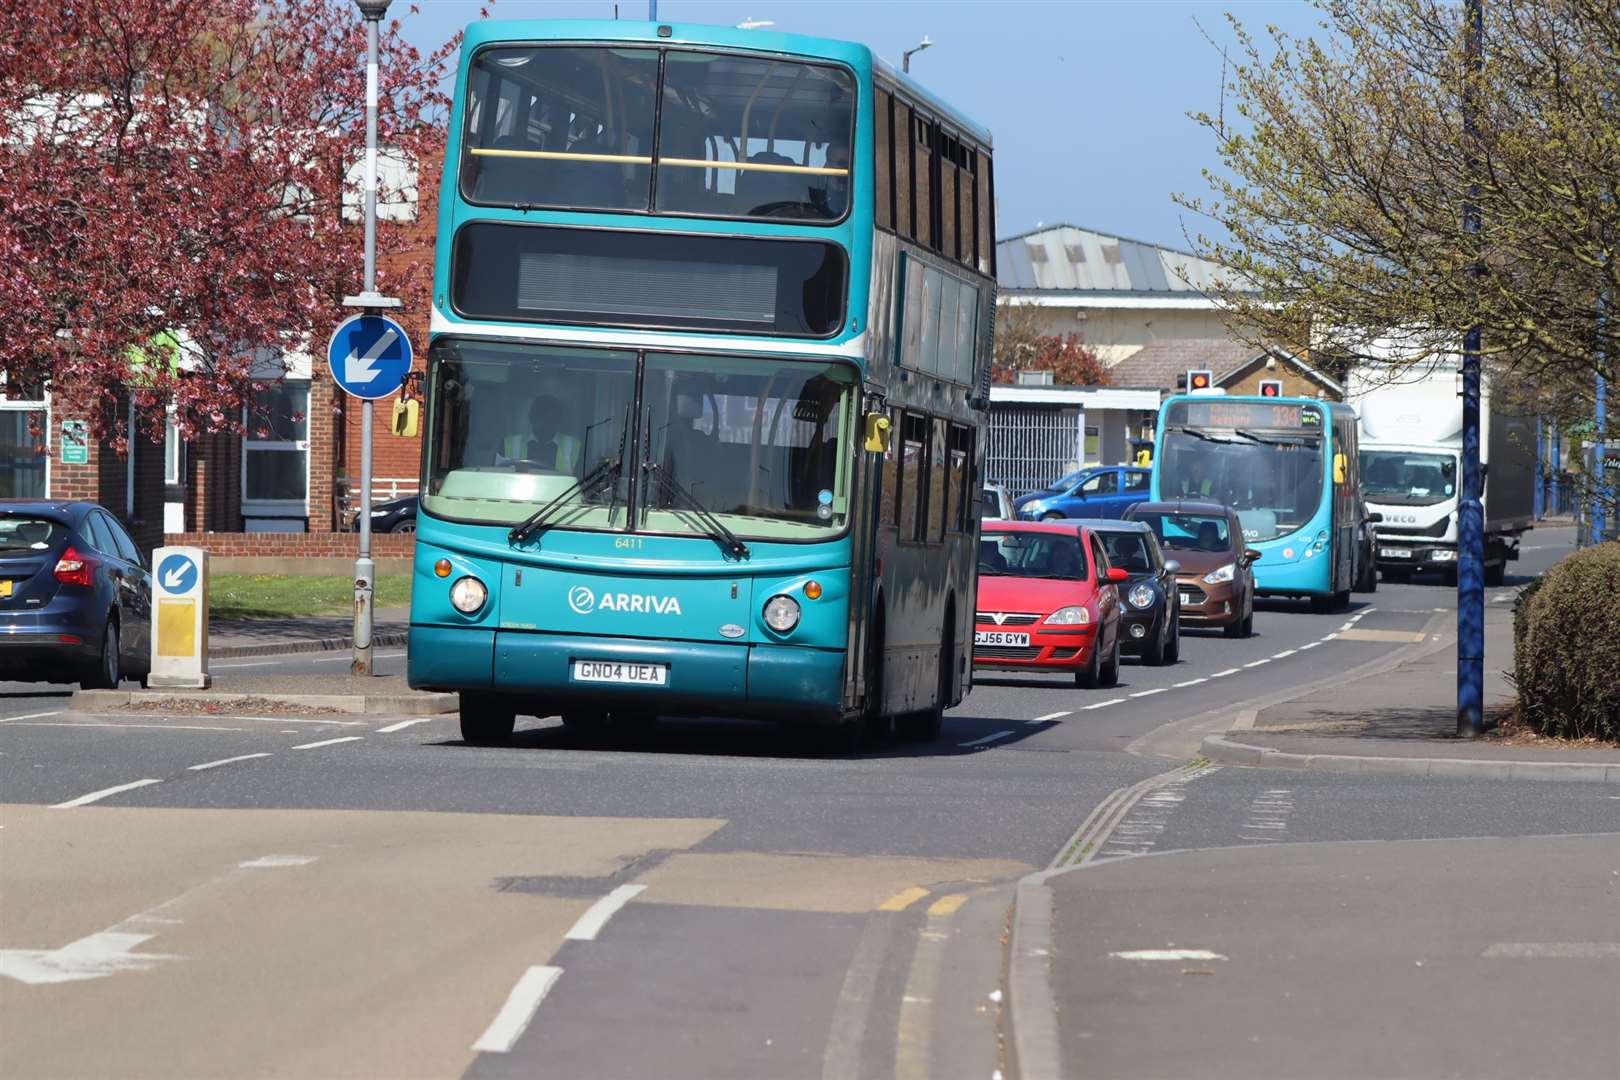 Buses may soon be running normally again